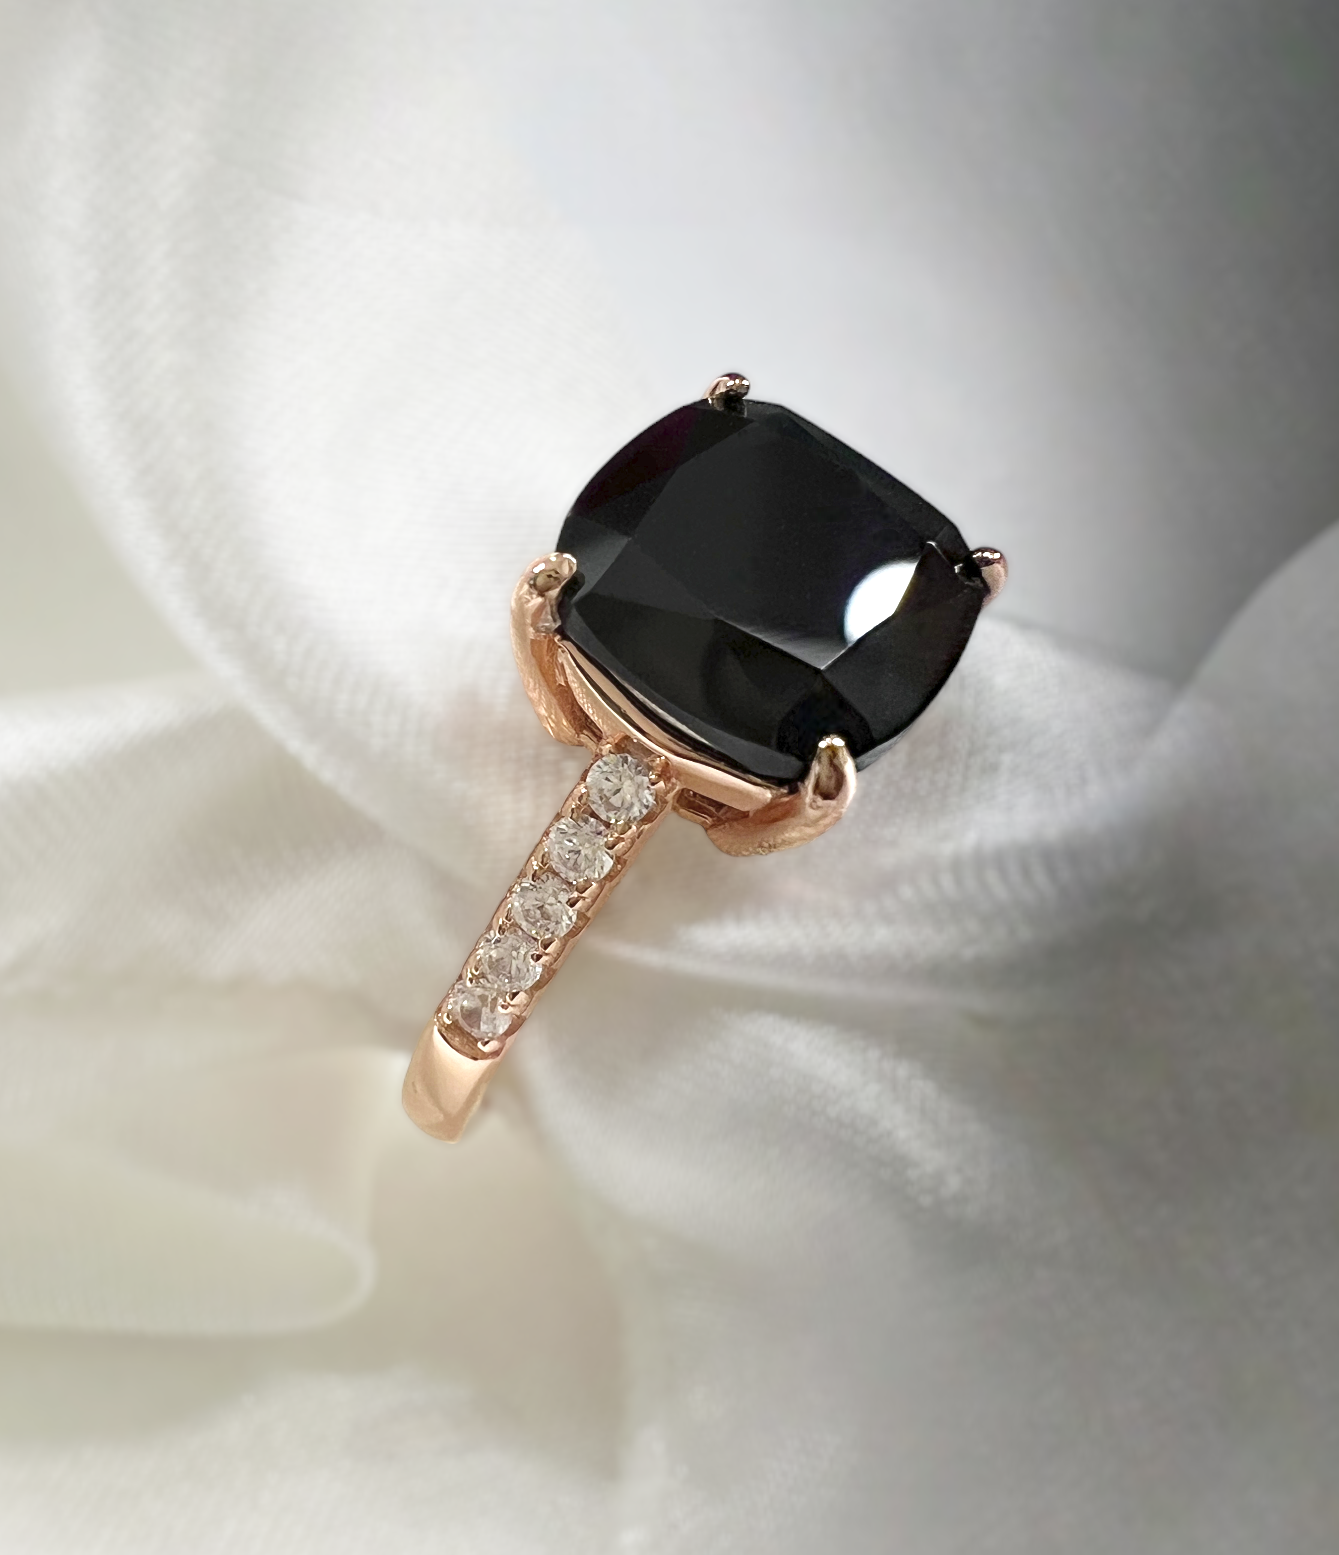 925 Sterling Silver Black Onyx Solitair Pave Band Ring on Rose Gold